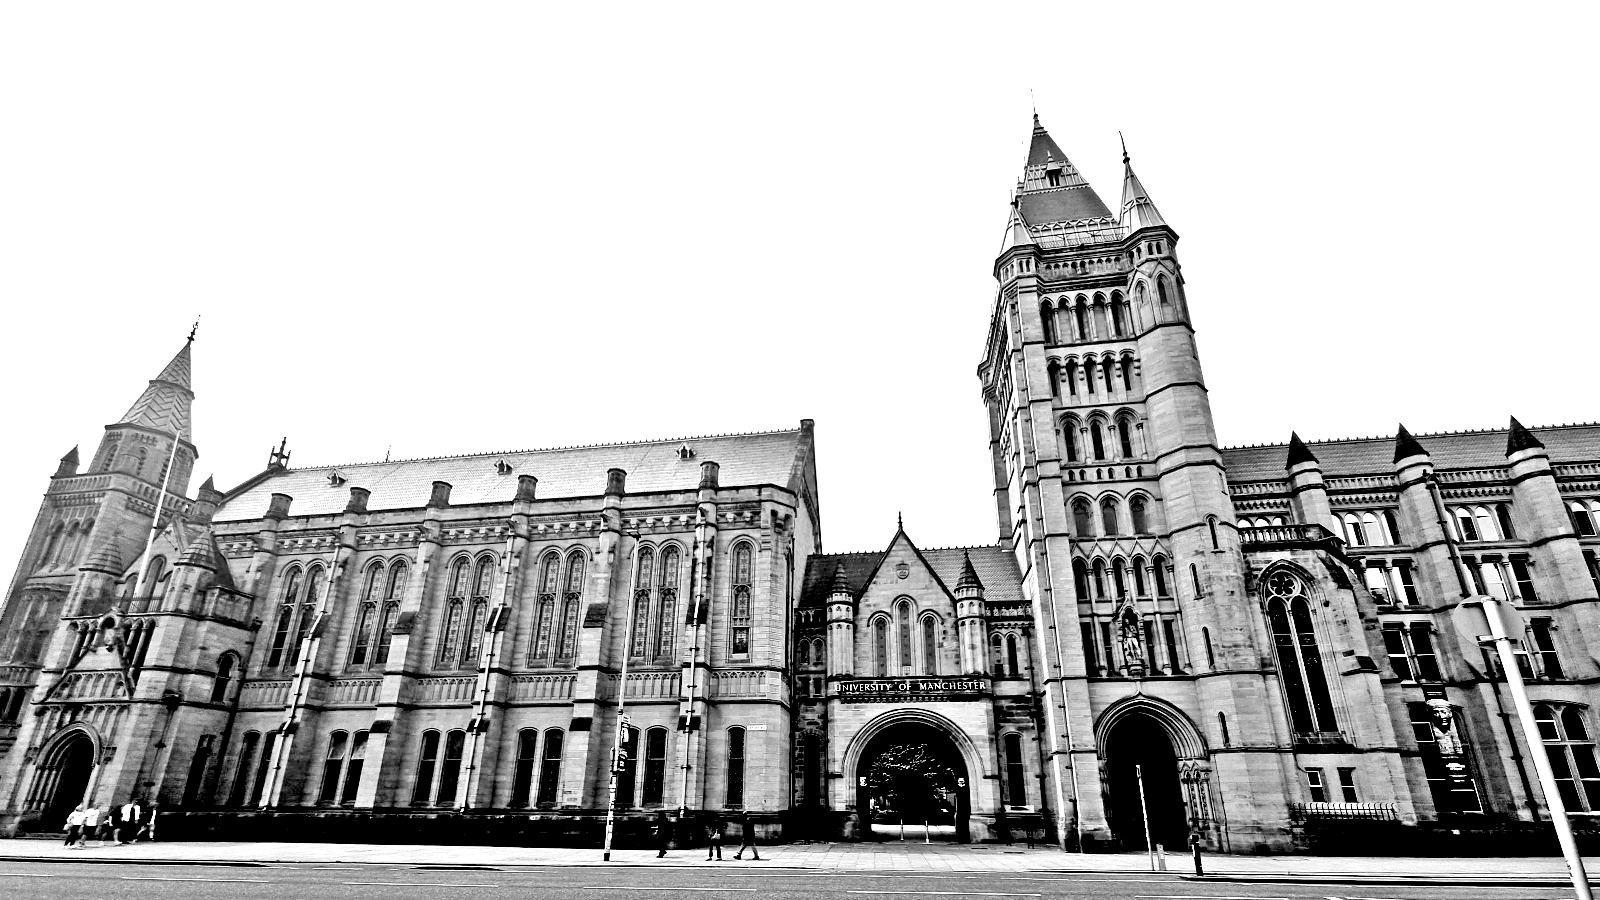 University of Manchester confirms data theft in recent cyberattack